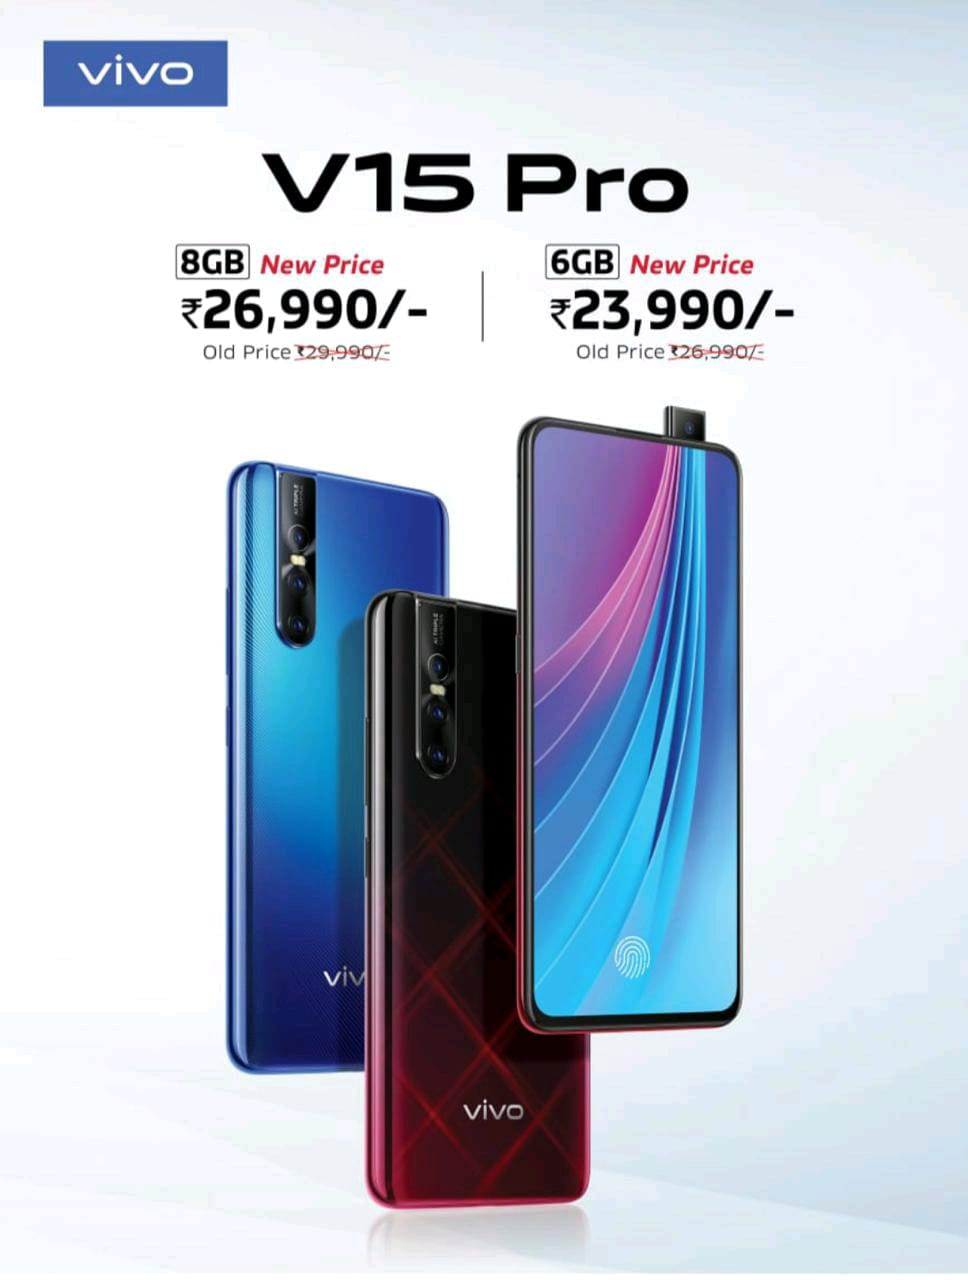 Vivo V15 Pro Price In India Cut By Rs 3 000 Now Starts At Rs 23 990 91mobiles Com